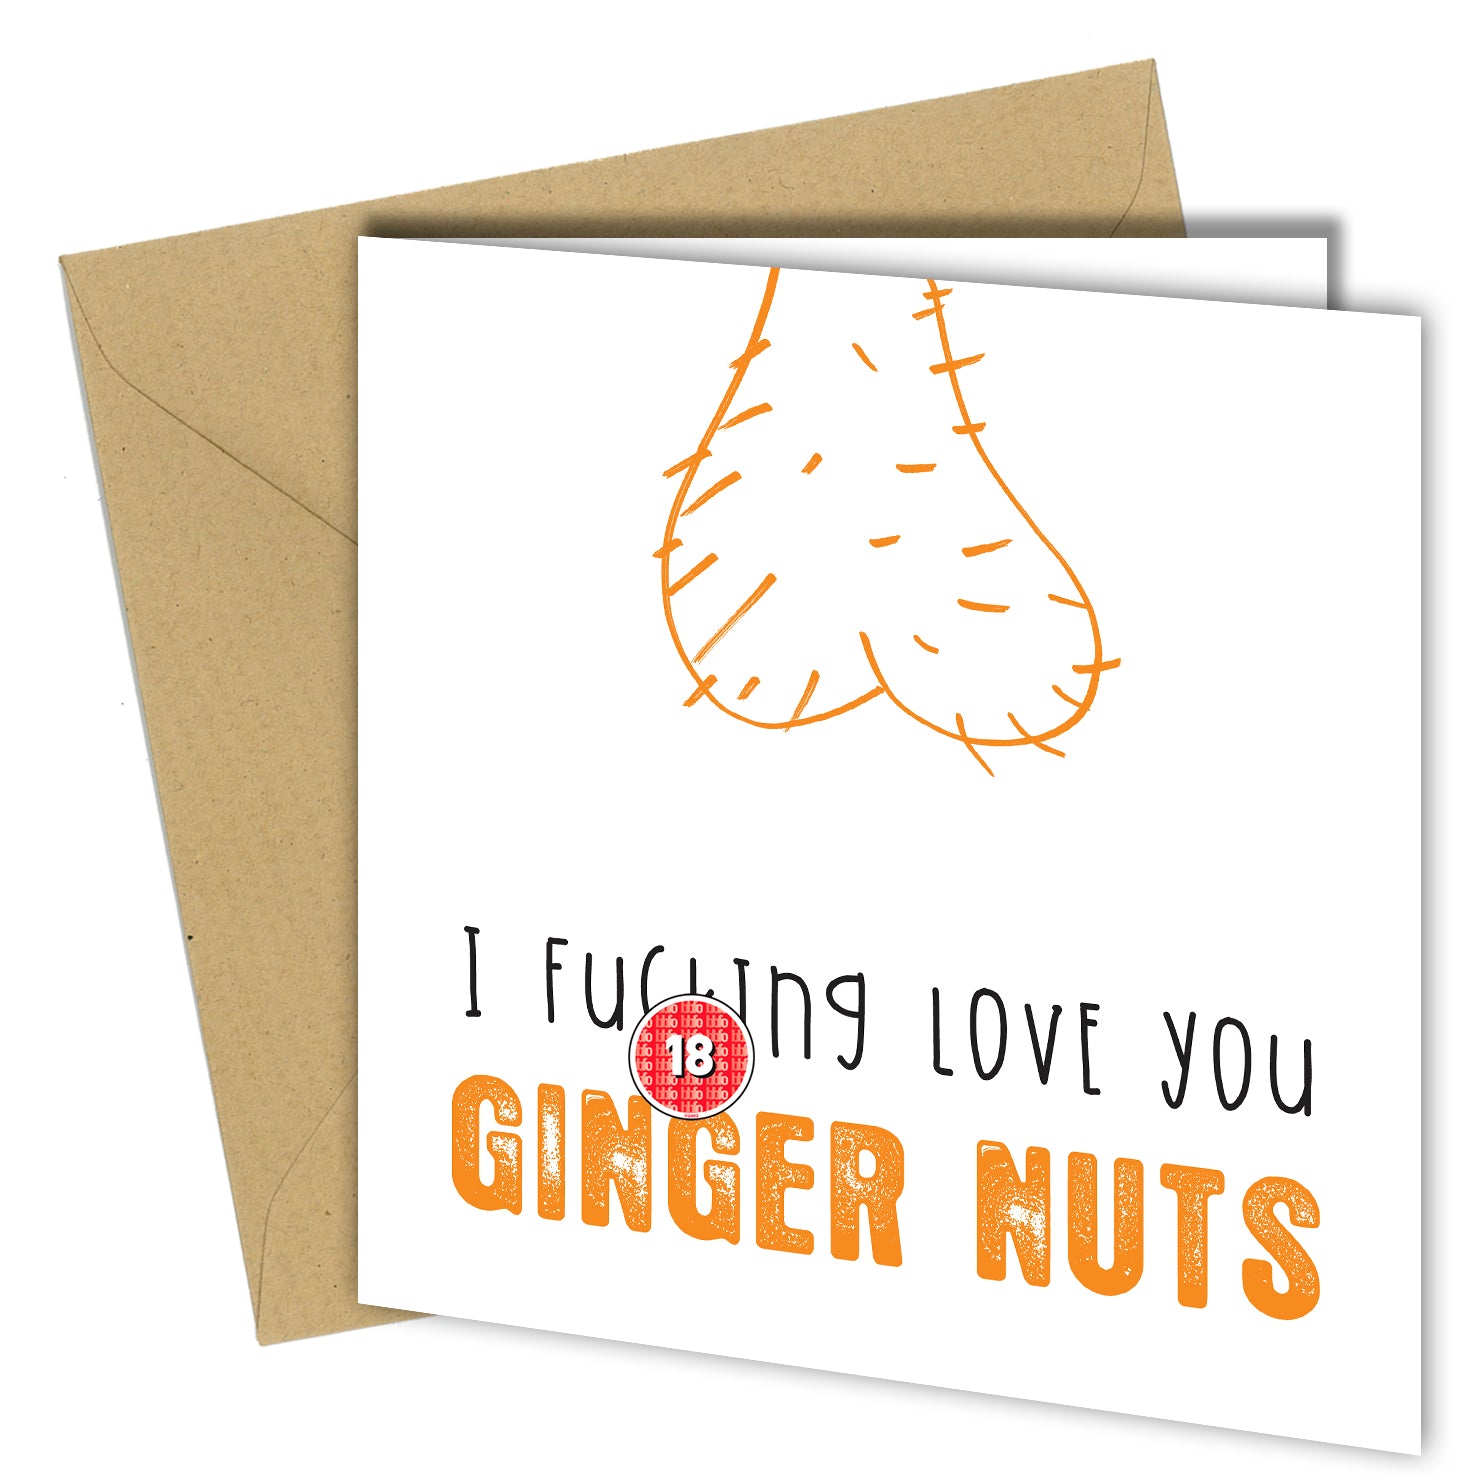 #761 Ginger Nuts